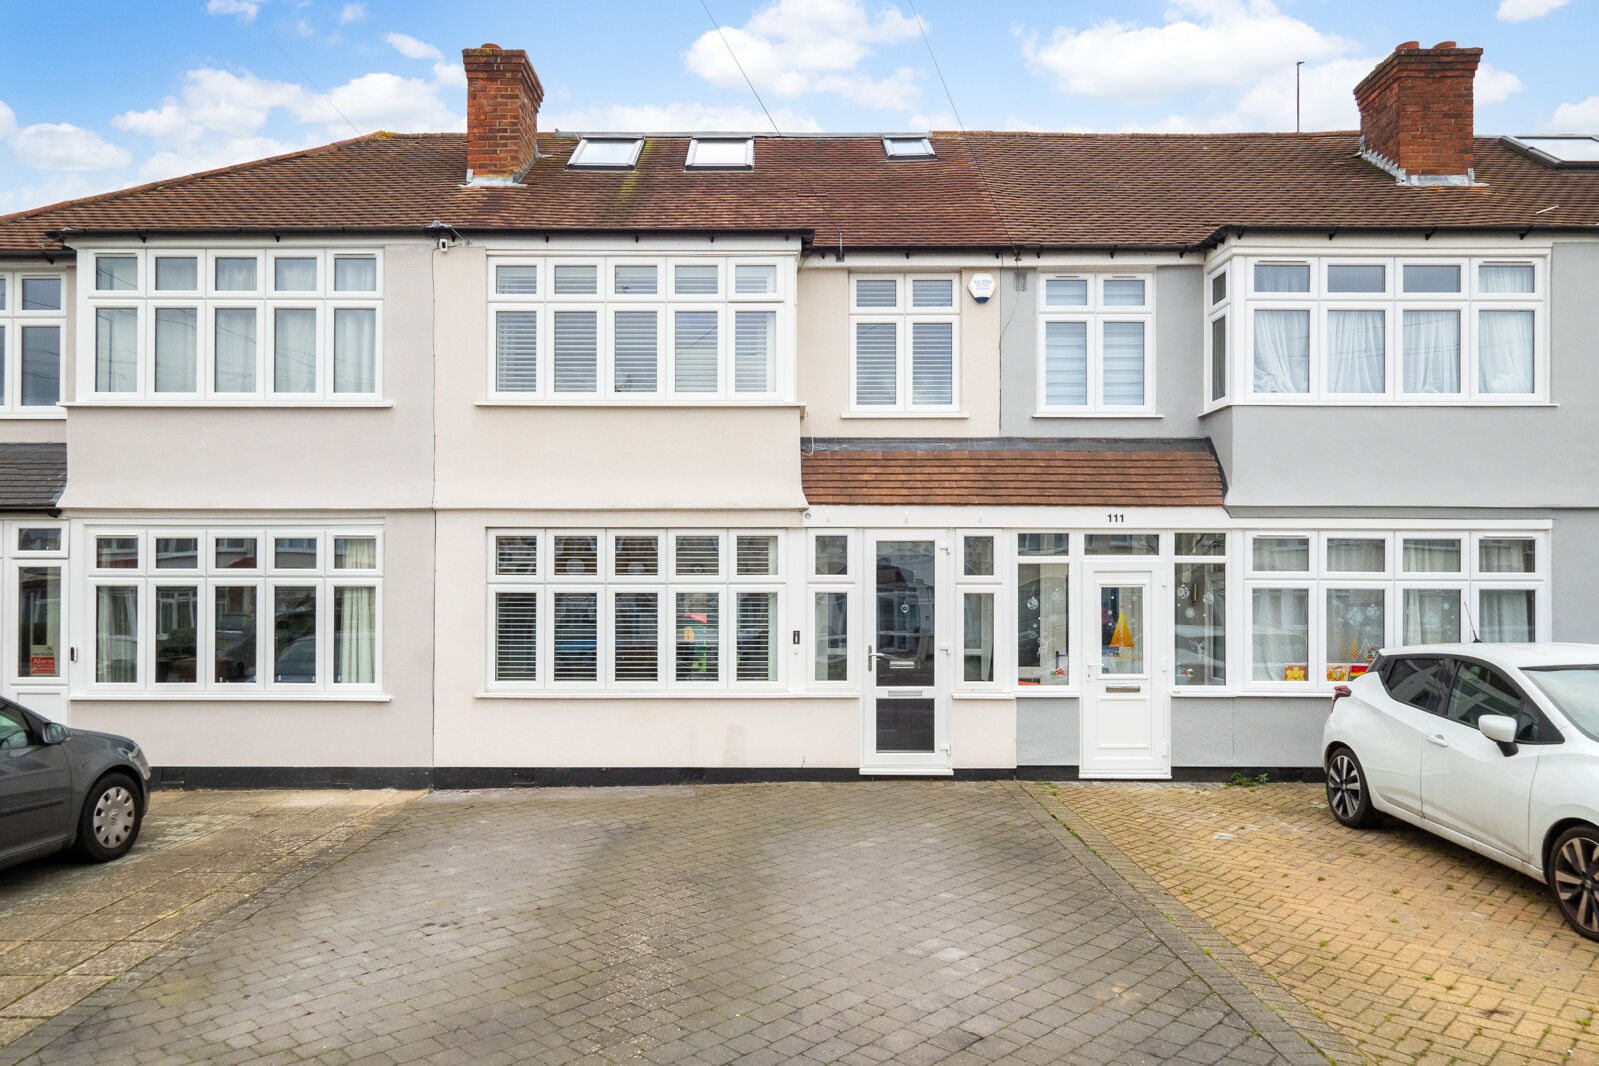 4 bedroom mid terraced house for sale Brocks Drive, Cheam, SM3, main image